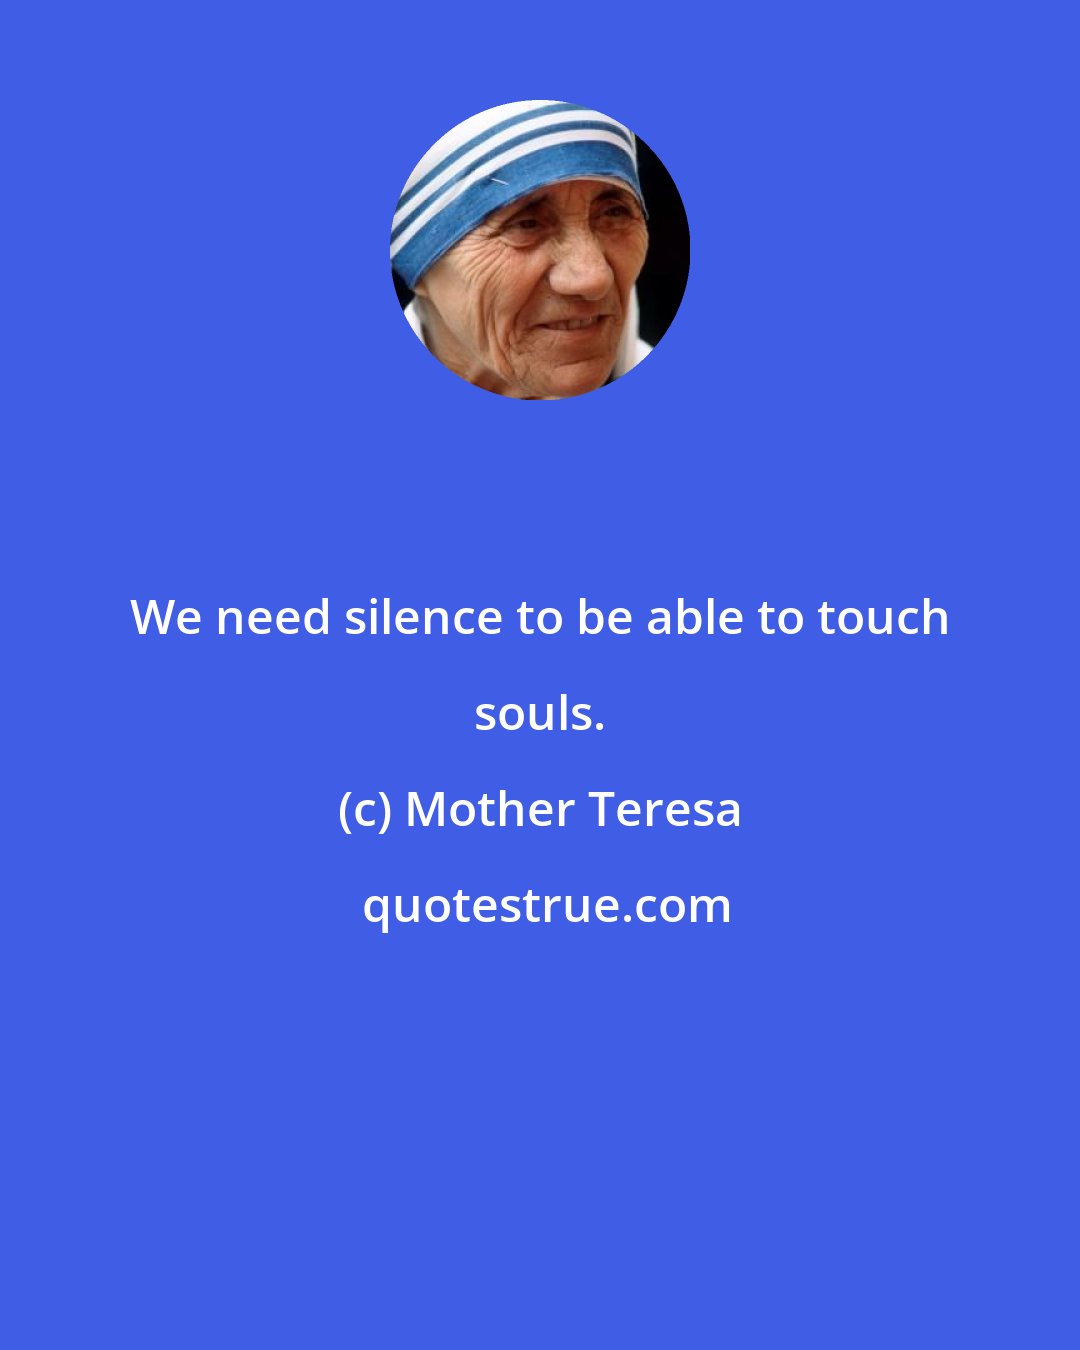 Mother Teresa: We need silence to be able to touch souls.